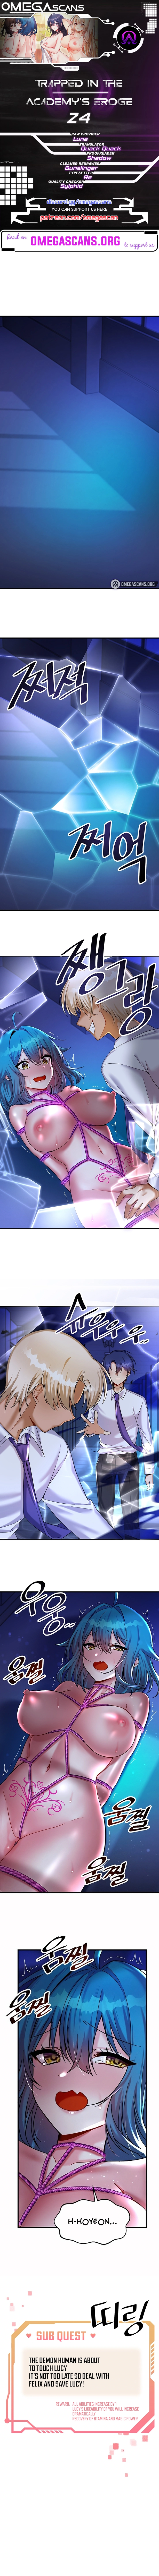 Trapped in the Academy’s Eroge image